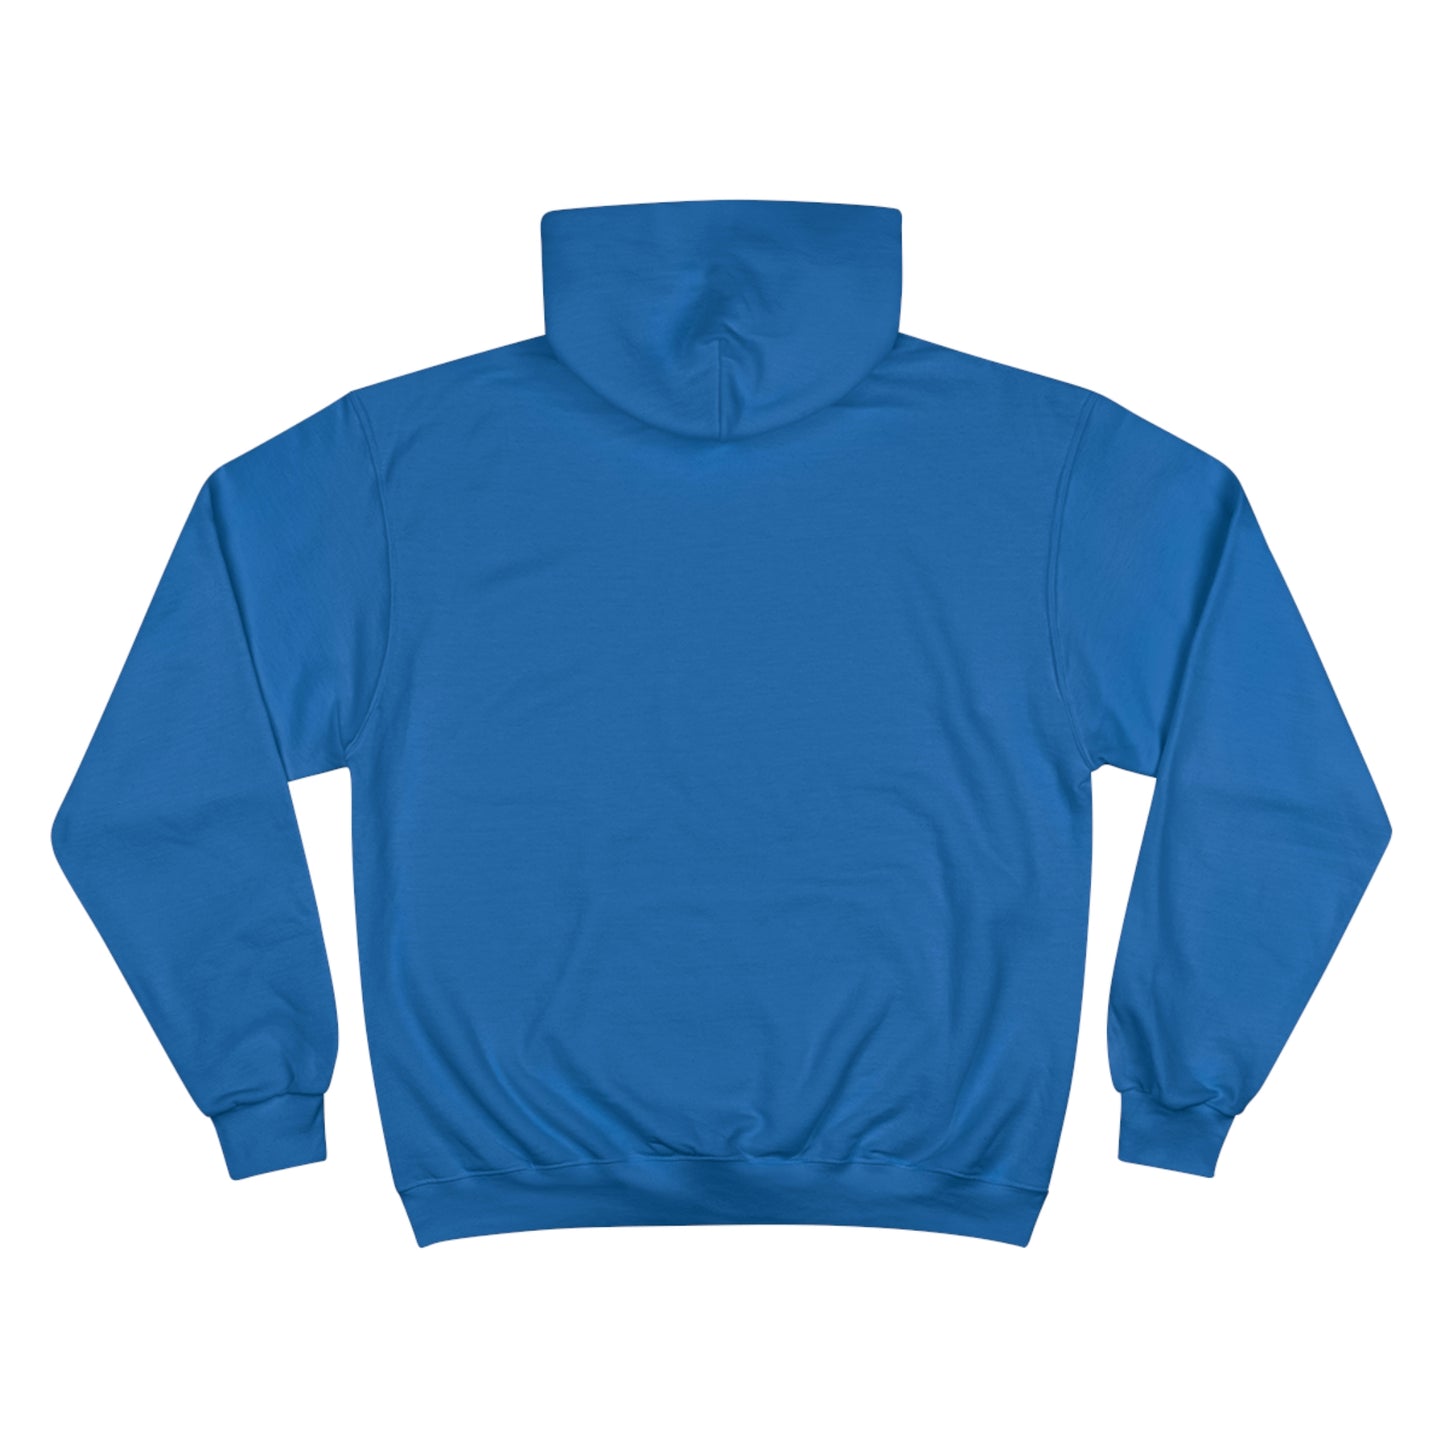 Champion Adult Hoodie, South Tiger Paw (Multiple Colors Available)